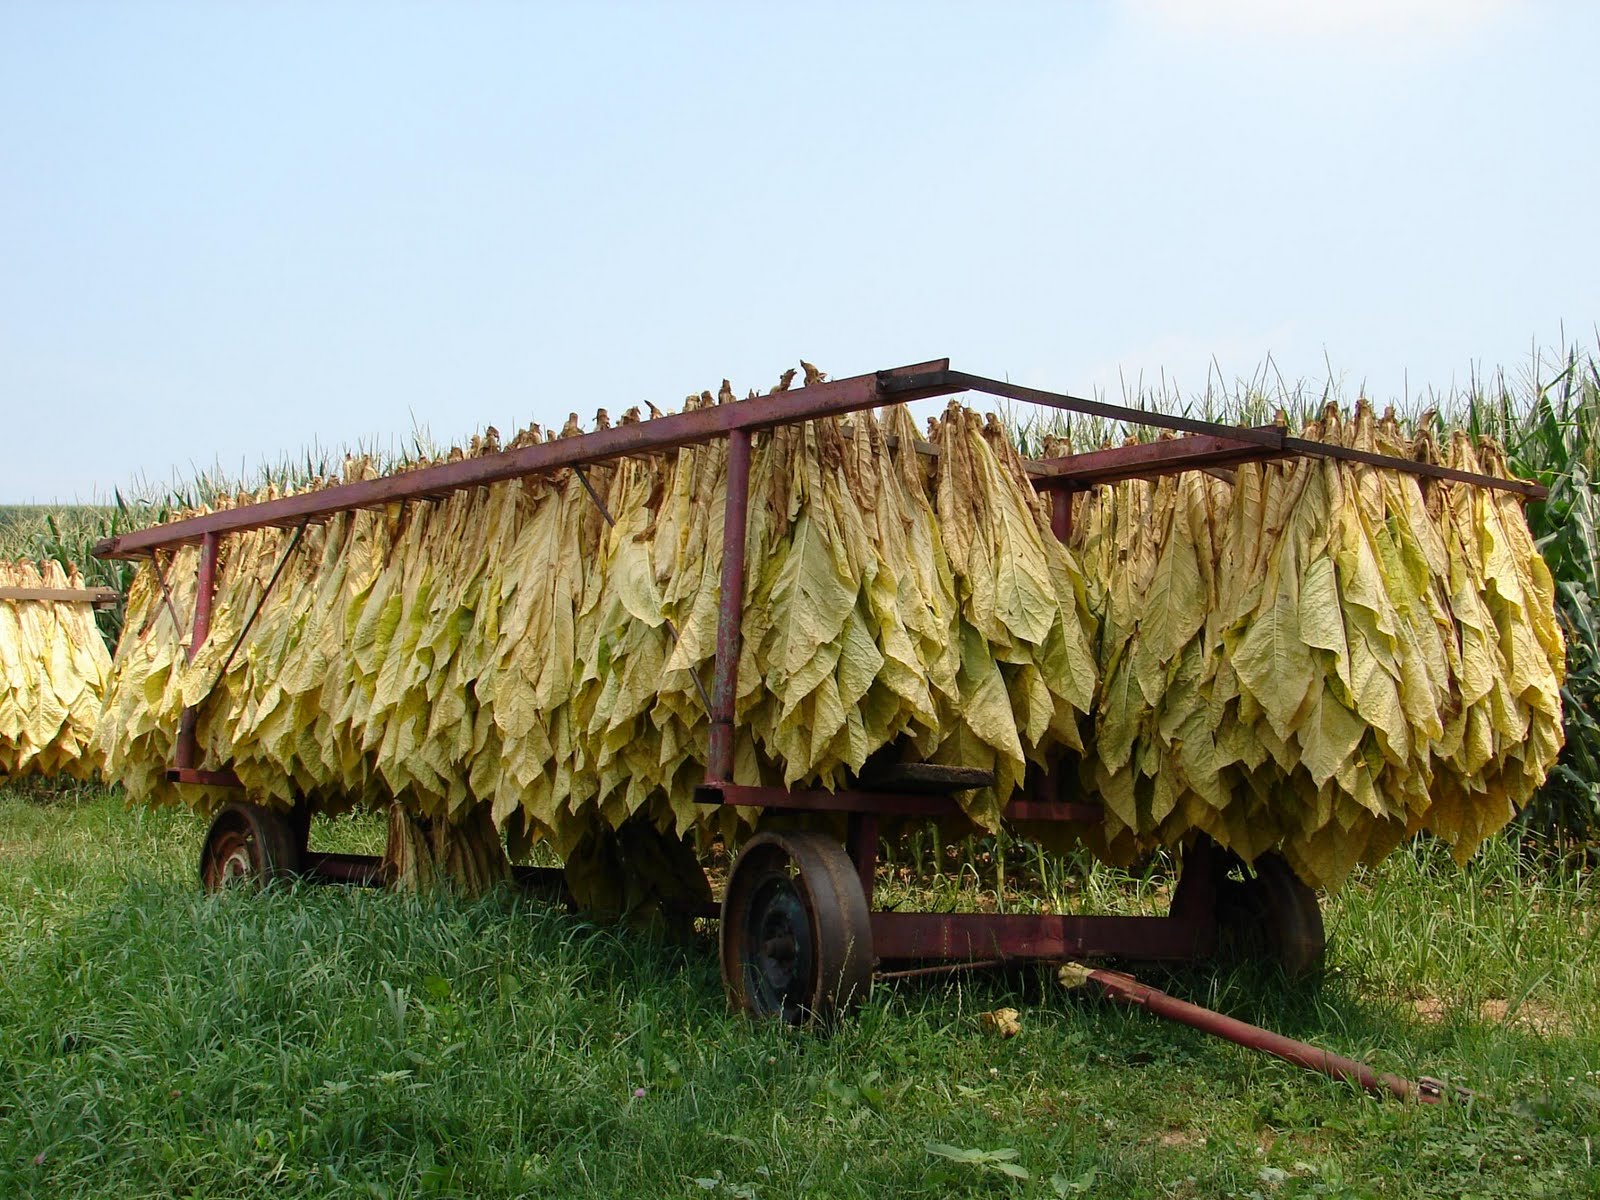 We do plan to sun dry the tobacco leaves as much as possible. This is faster and produces tobacco with much lower nicotine levels and less ammonia.